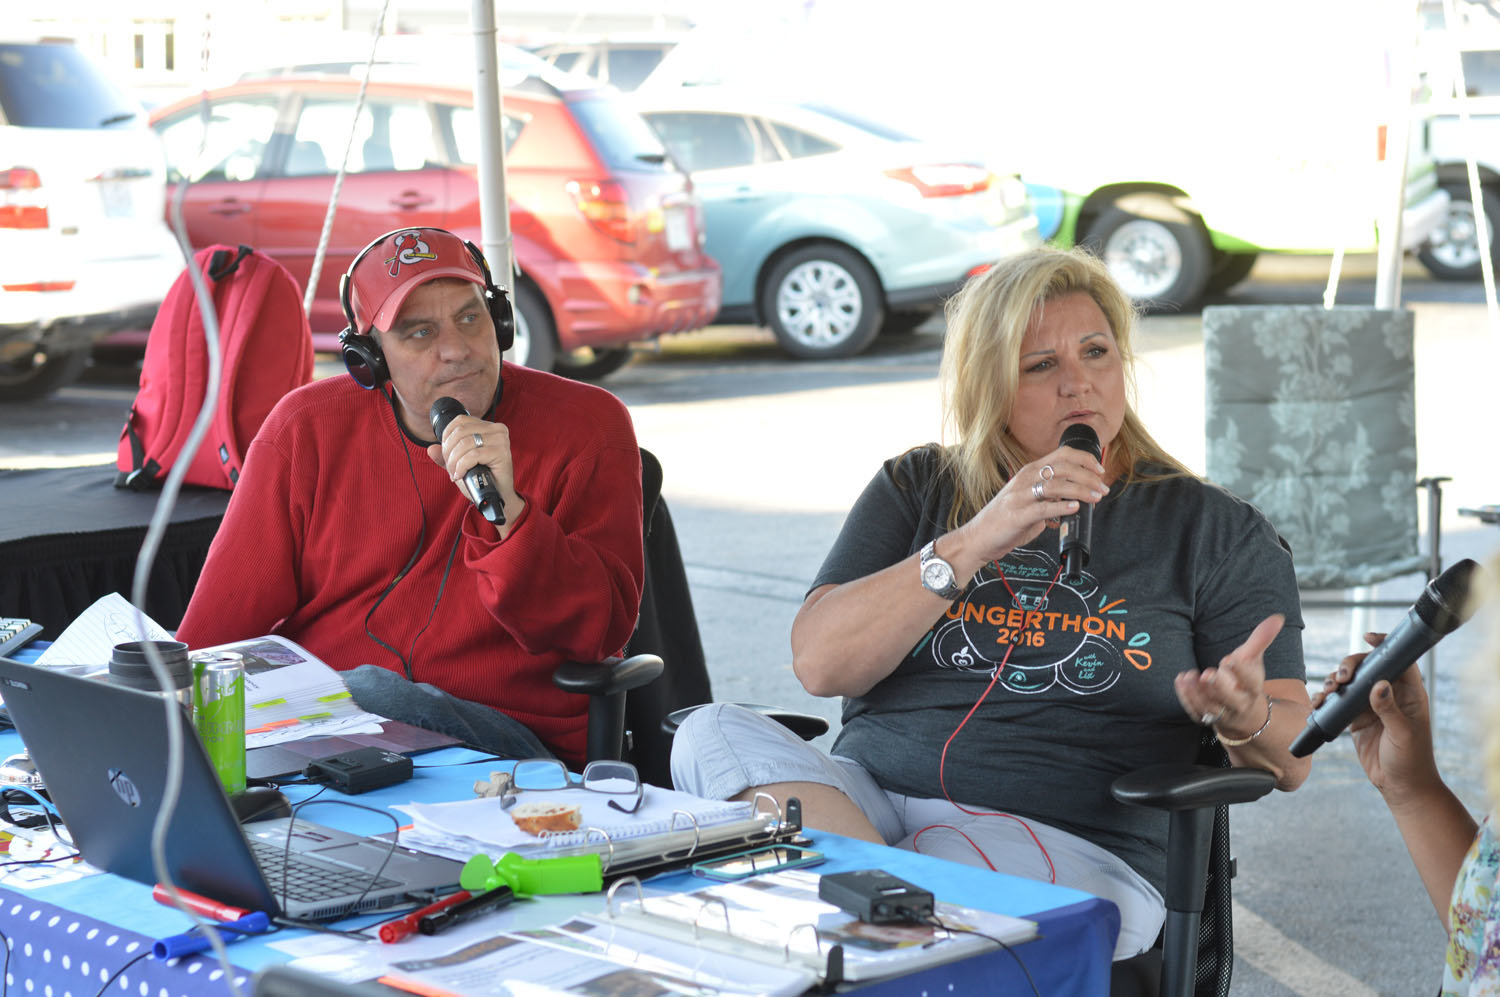 Former KGBX disc jockeys Kevin Howard, left, and Liz Delany broadcast during the 2016 Hungerthon fundraising to benefit Ozarks Food Harvest. The event collected $156,500 last year.